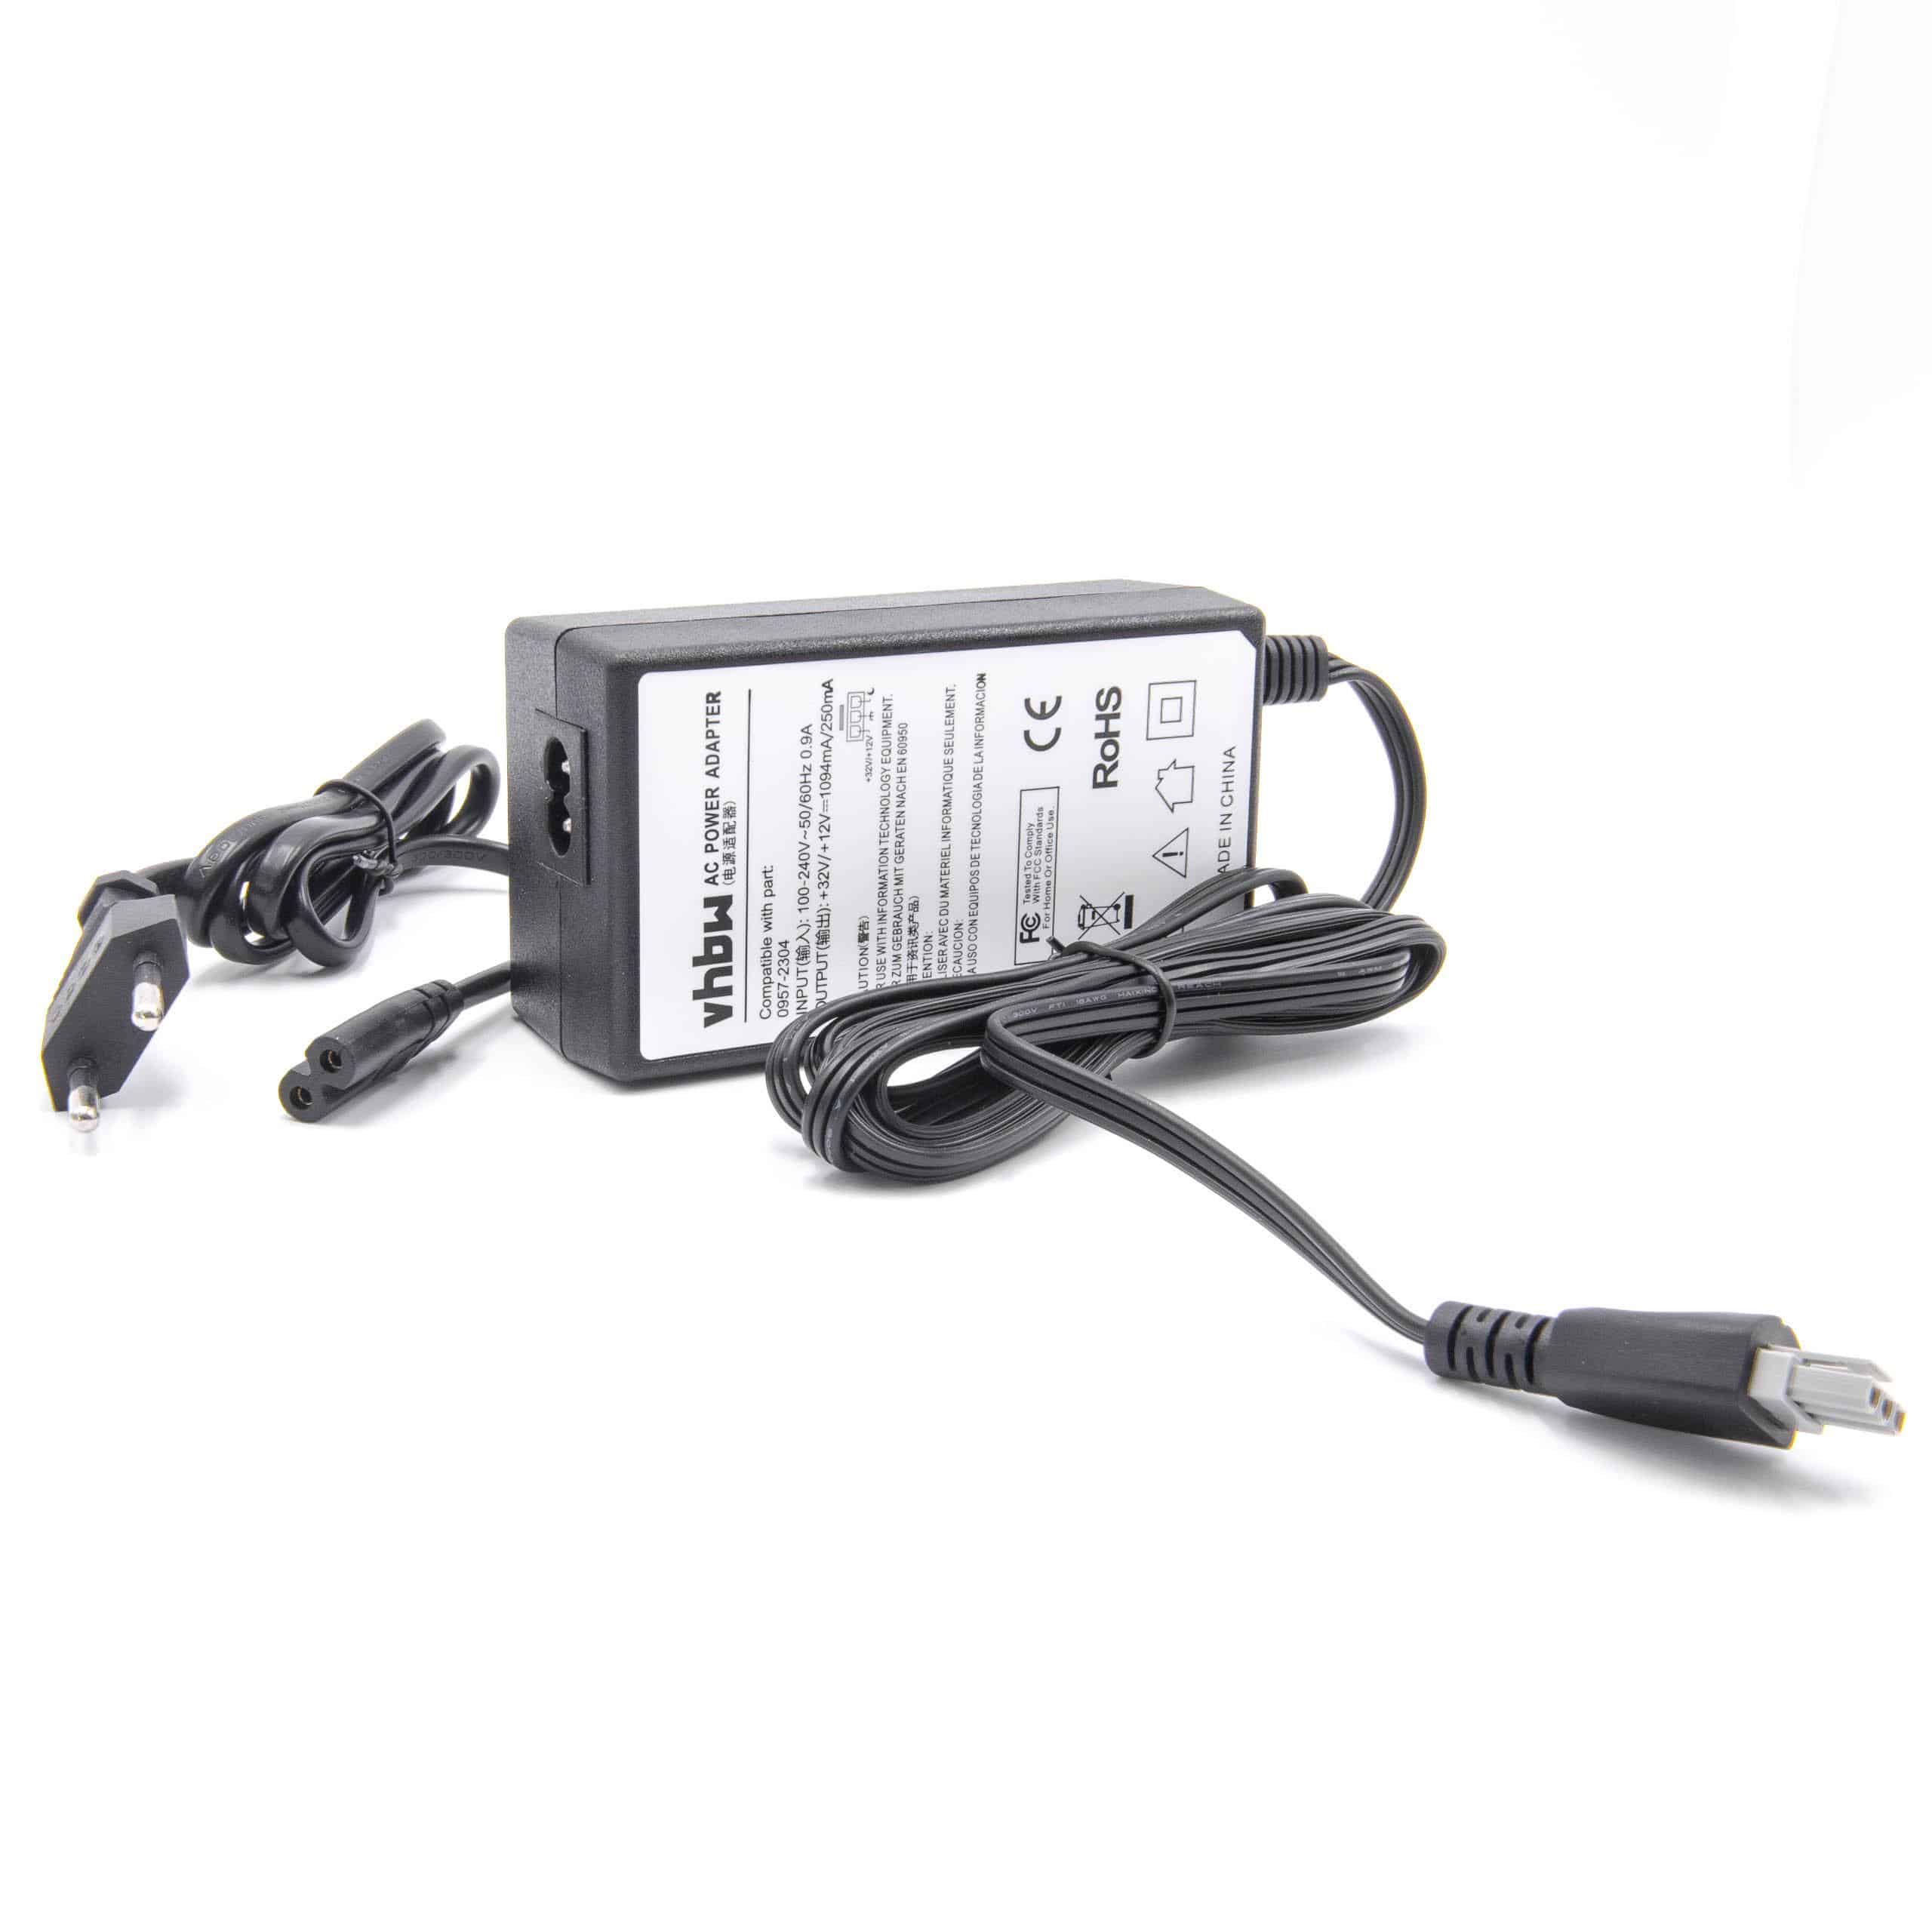 Mains Power Adapter replaces HP 0957-2304 for Printer